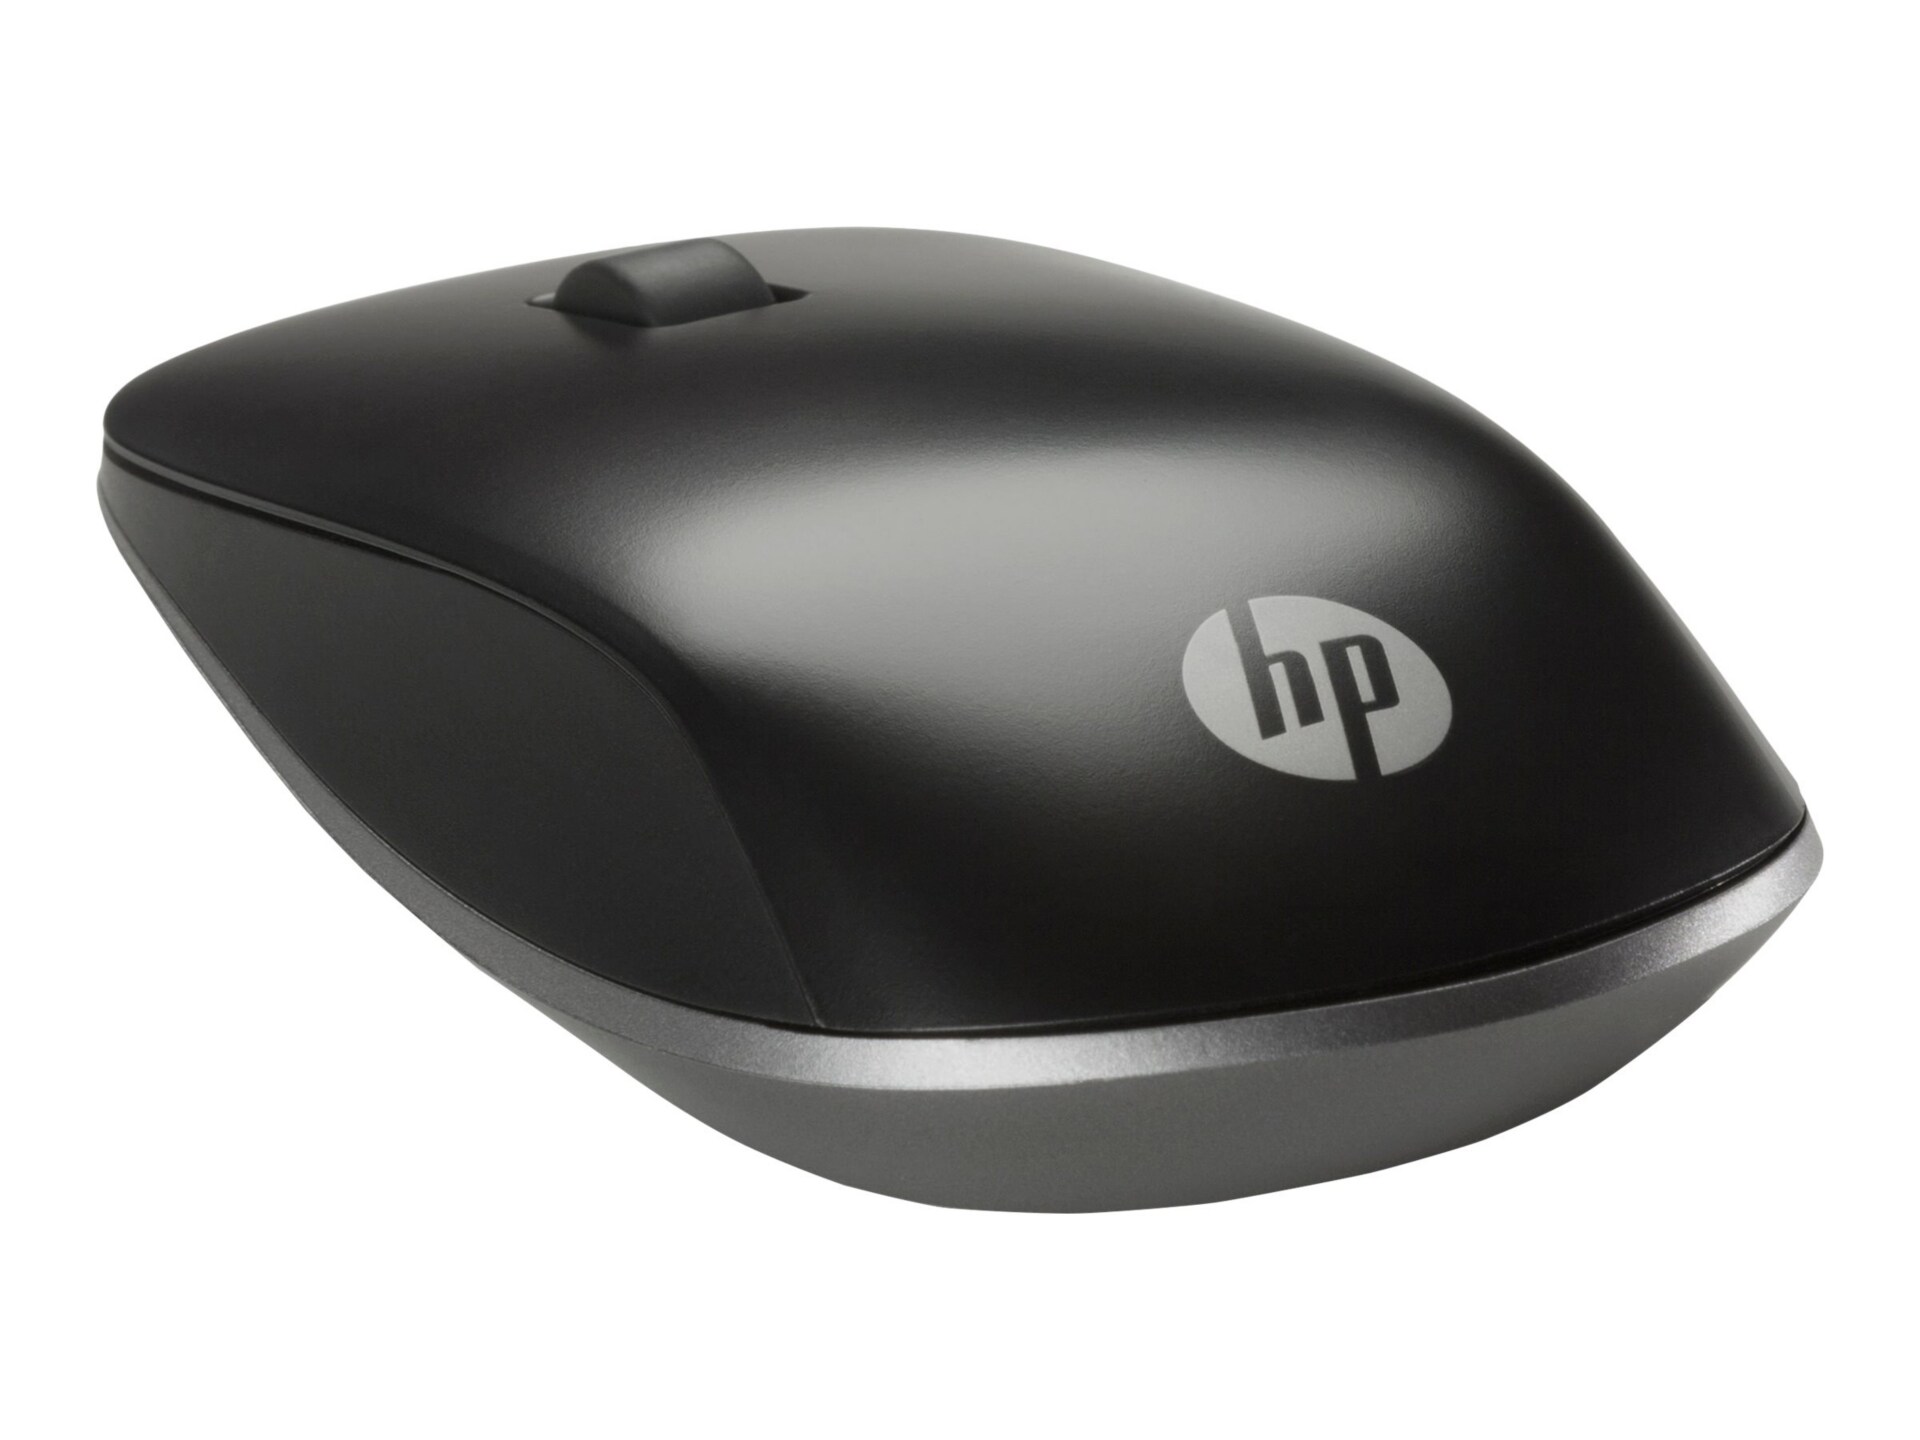 HP Ultra Mobile - mouse - 2.4 GHz - Smart Buy